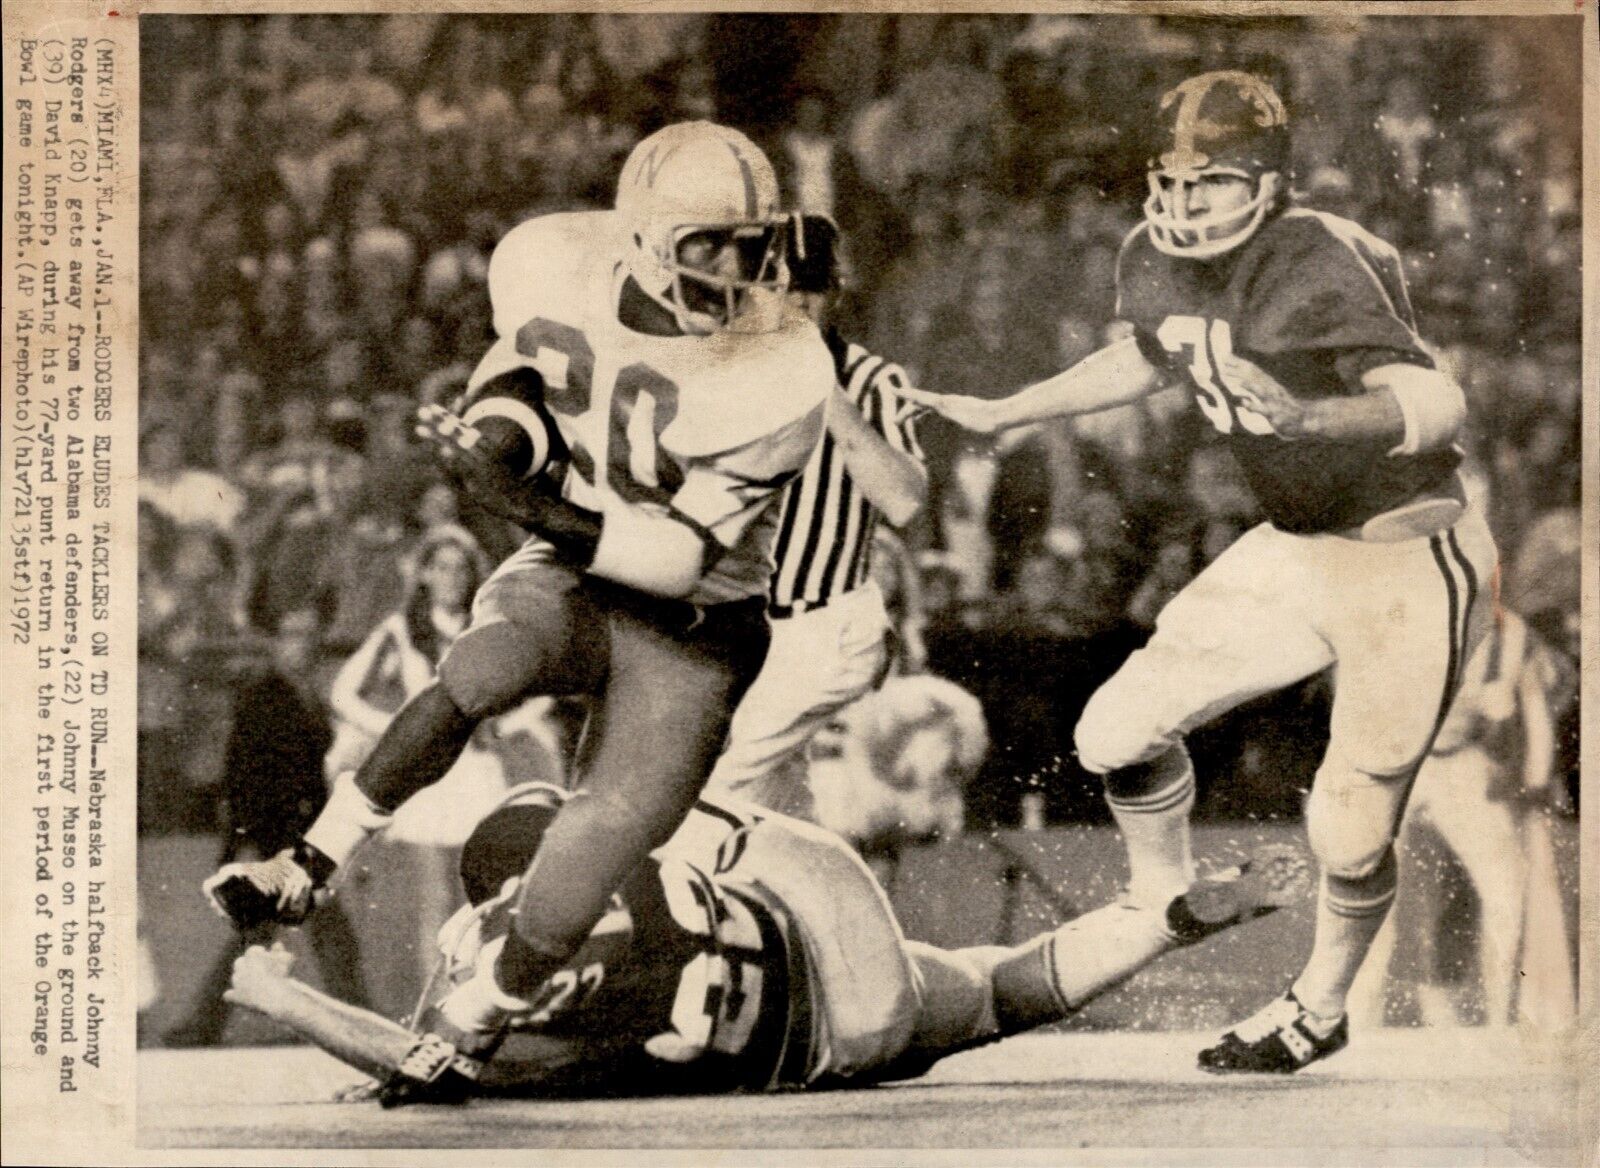 LG8 1972 AP Wire Photo CORNHUSKERS HB JOHNNY RODGERS ELUDES TACKLERS ON TD RUN